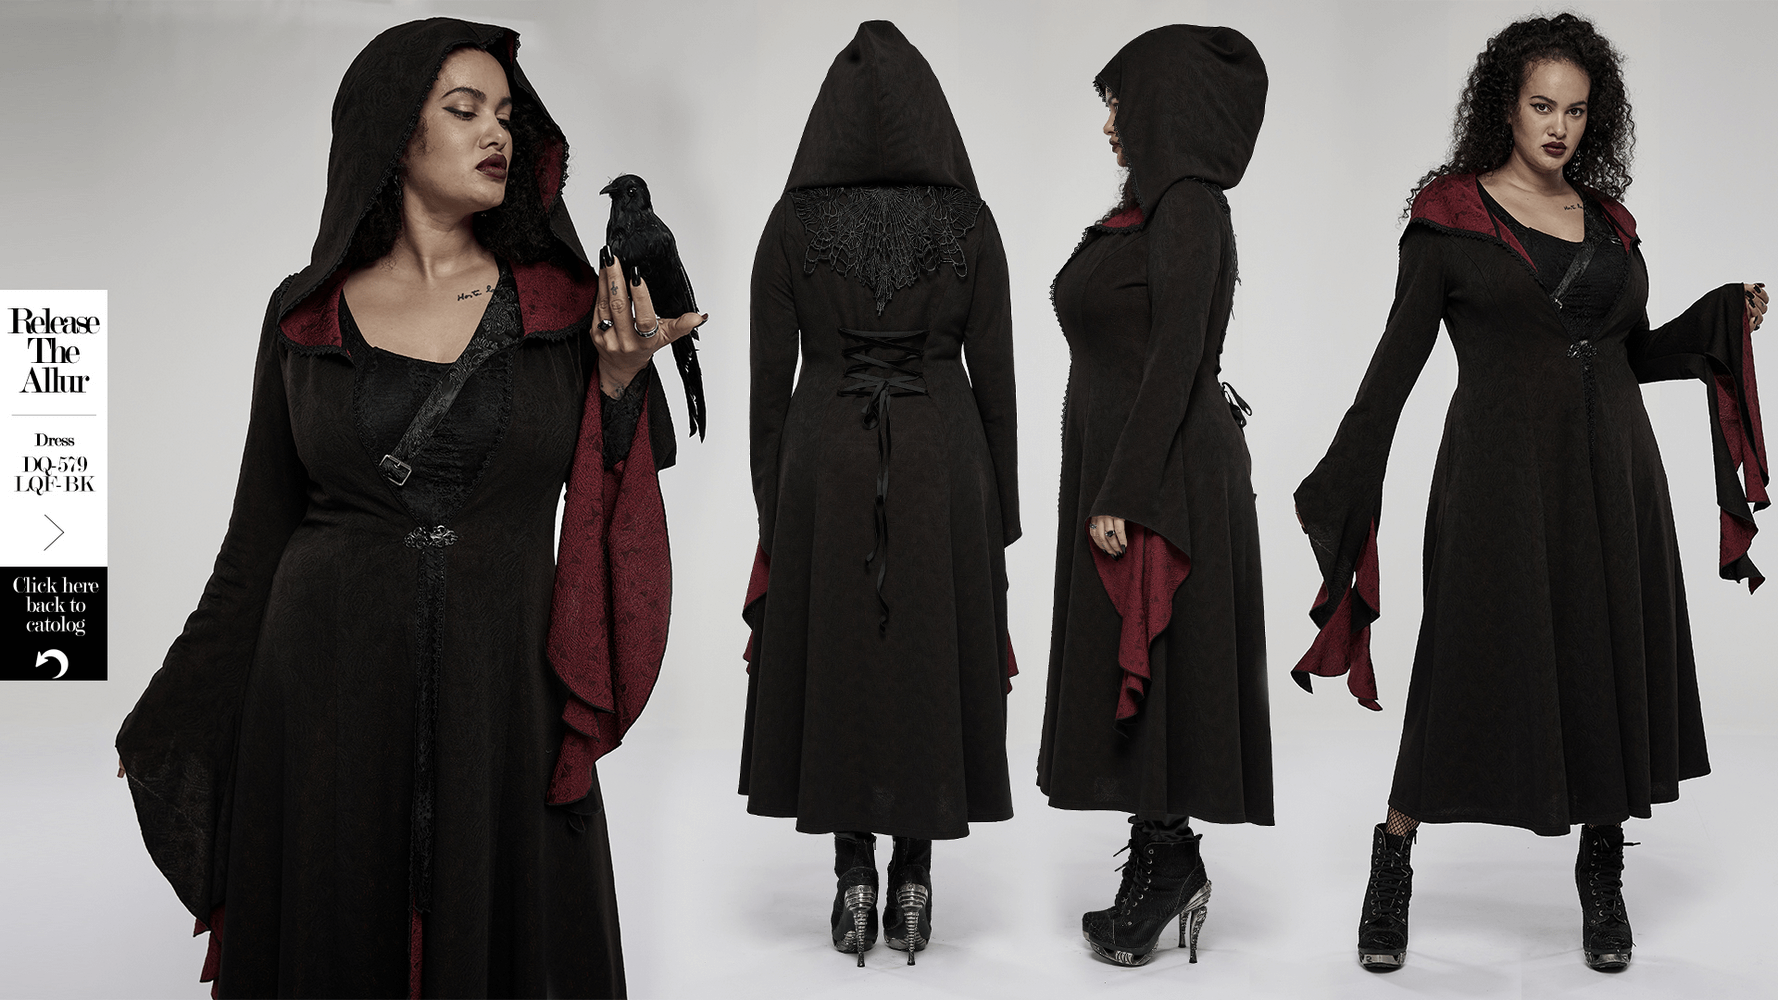 Womens Hooded Gothic Witch Coat with Lace Detail - HARD'N'HEAVY